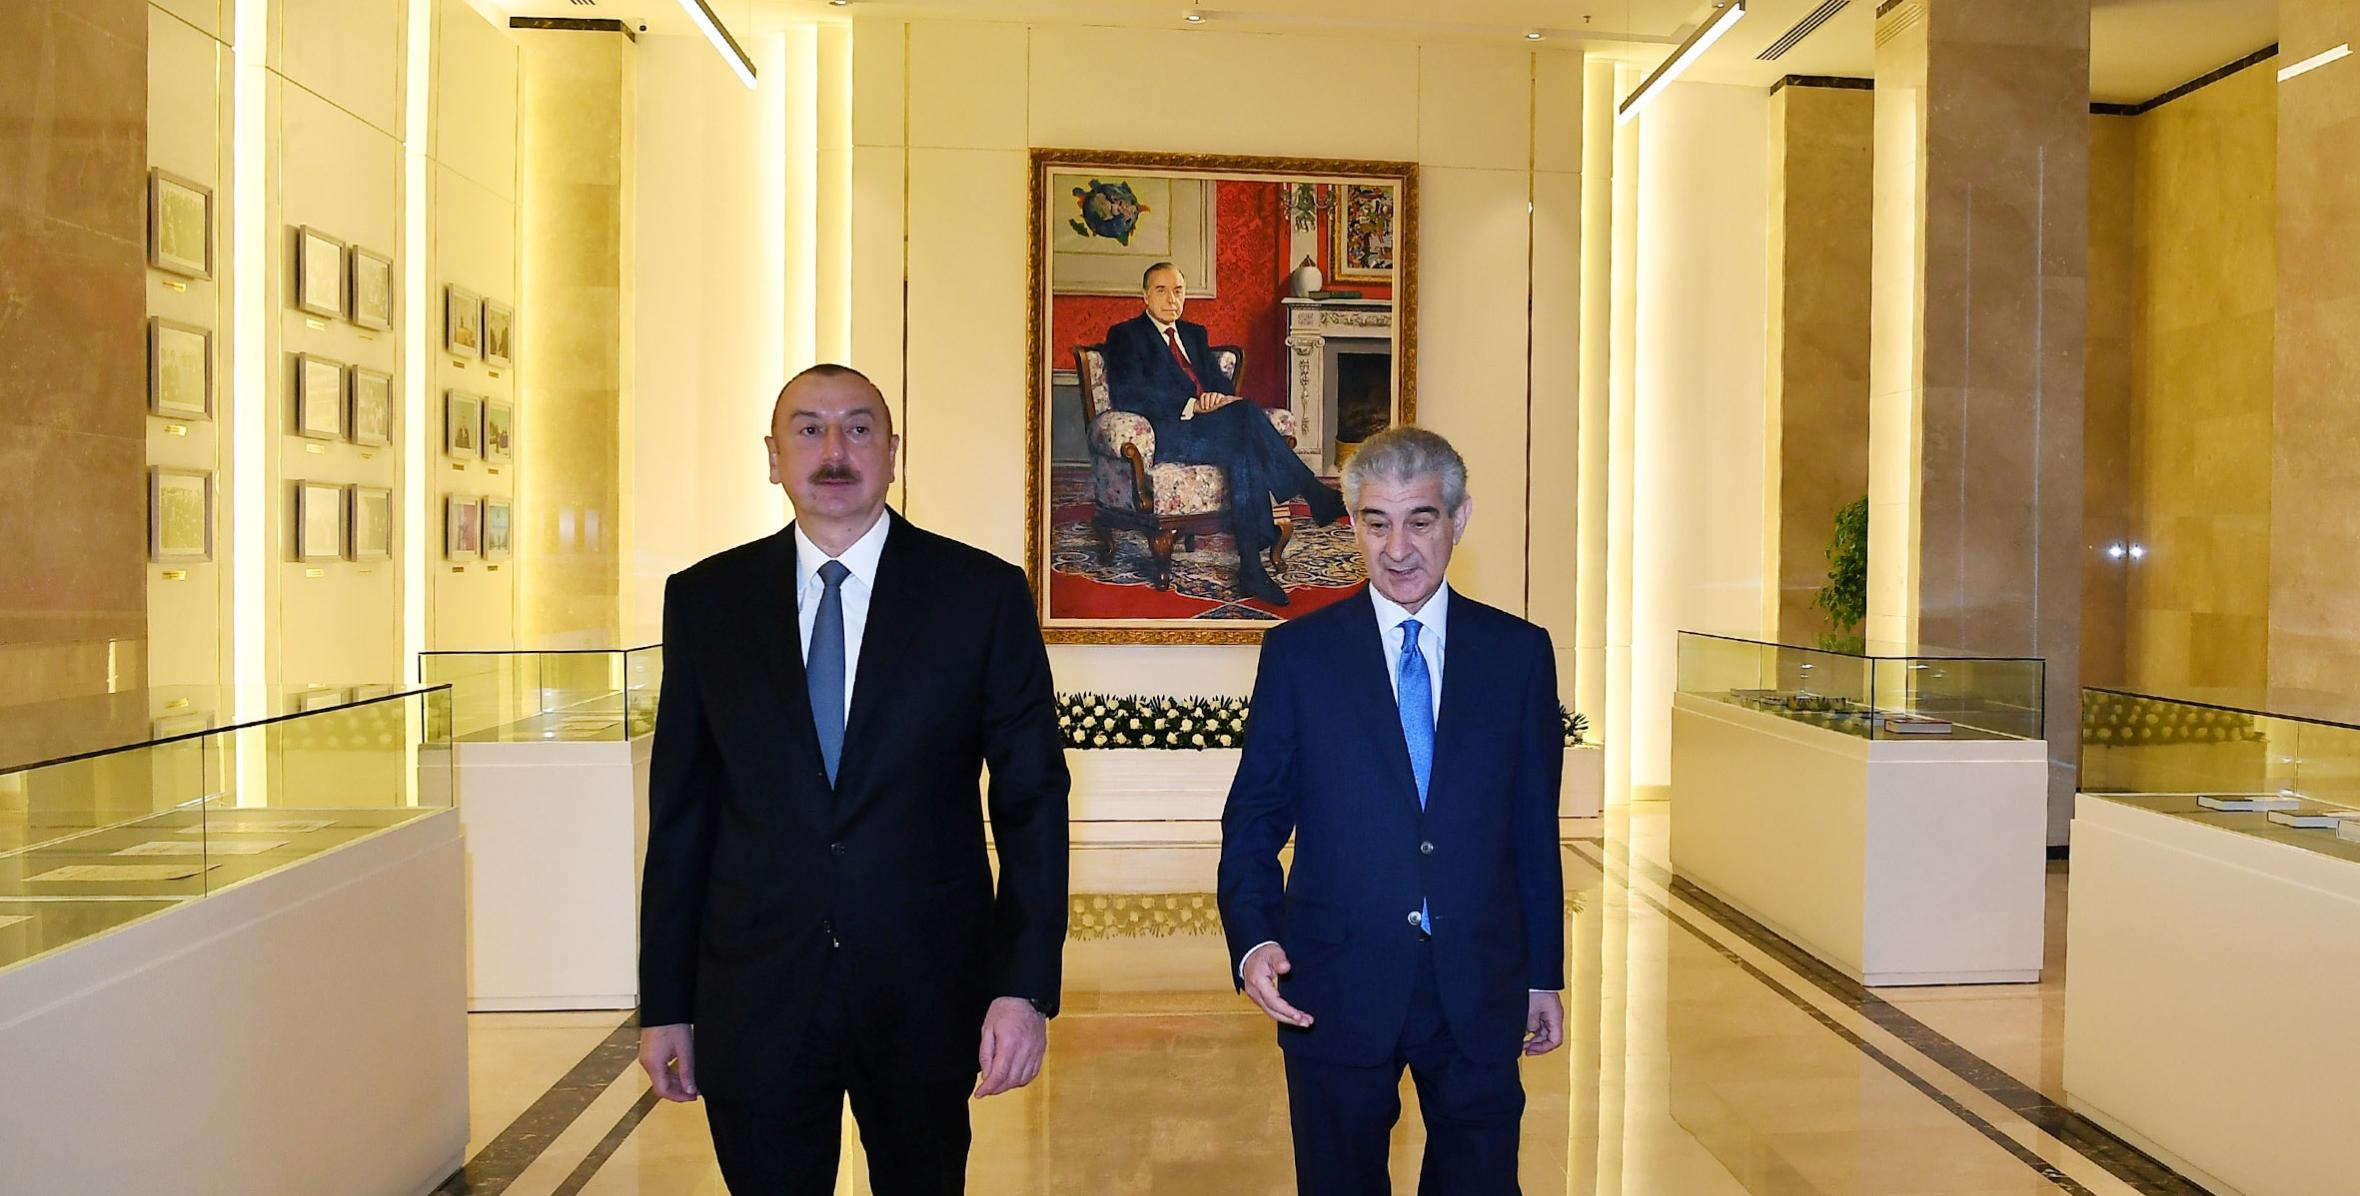 Ilham Aliyev inaugurated new administrative building of New Azerbaijan Party